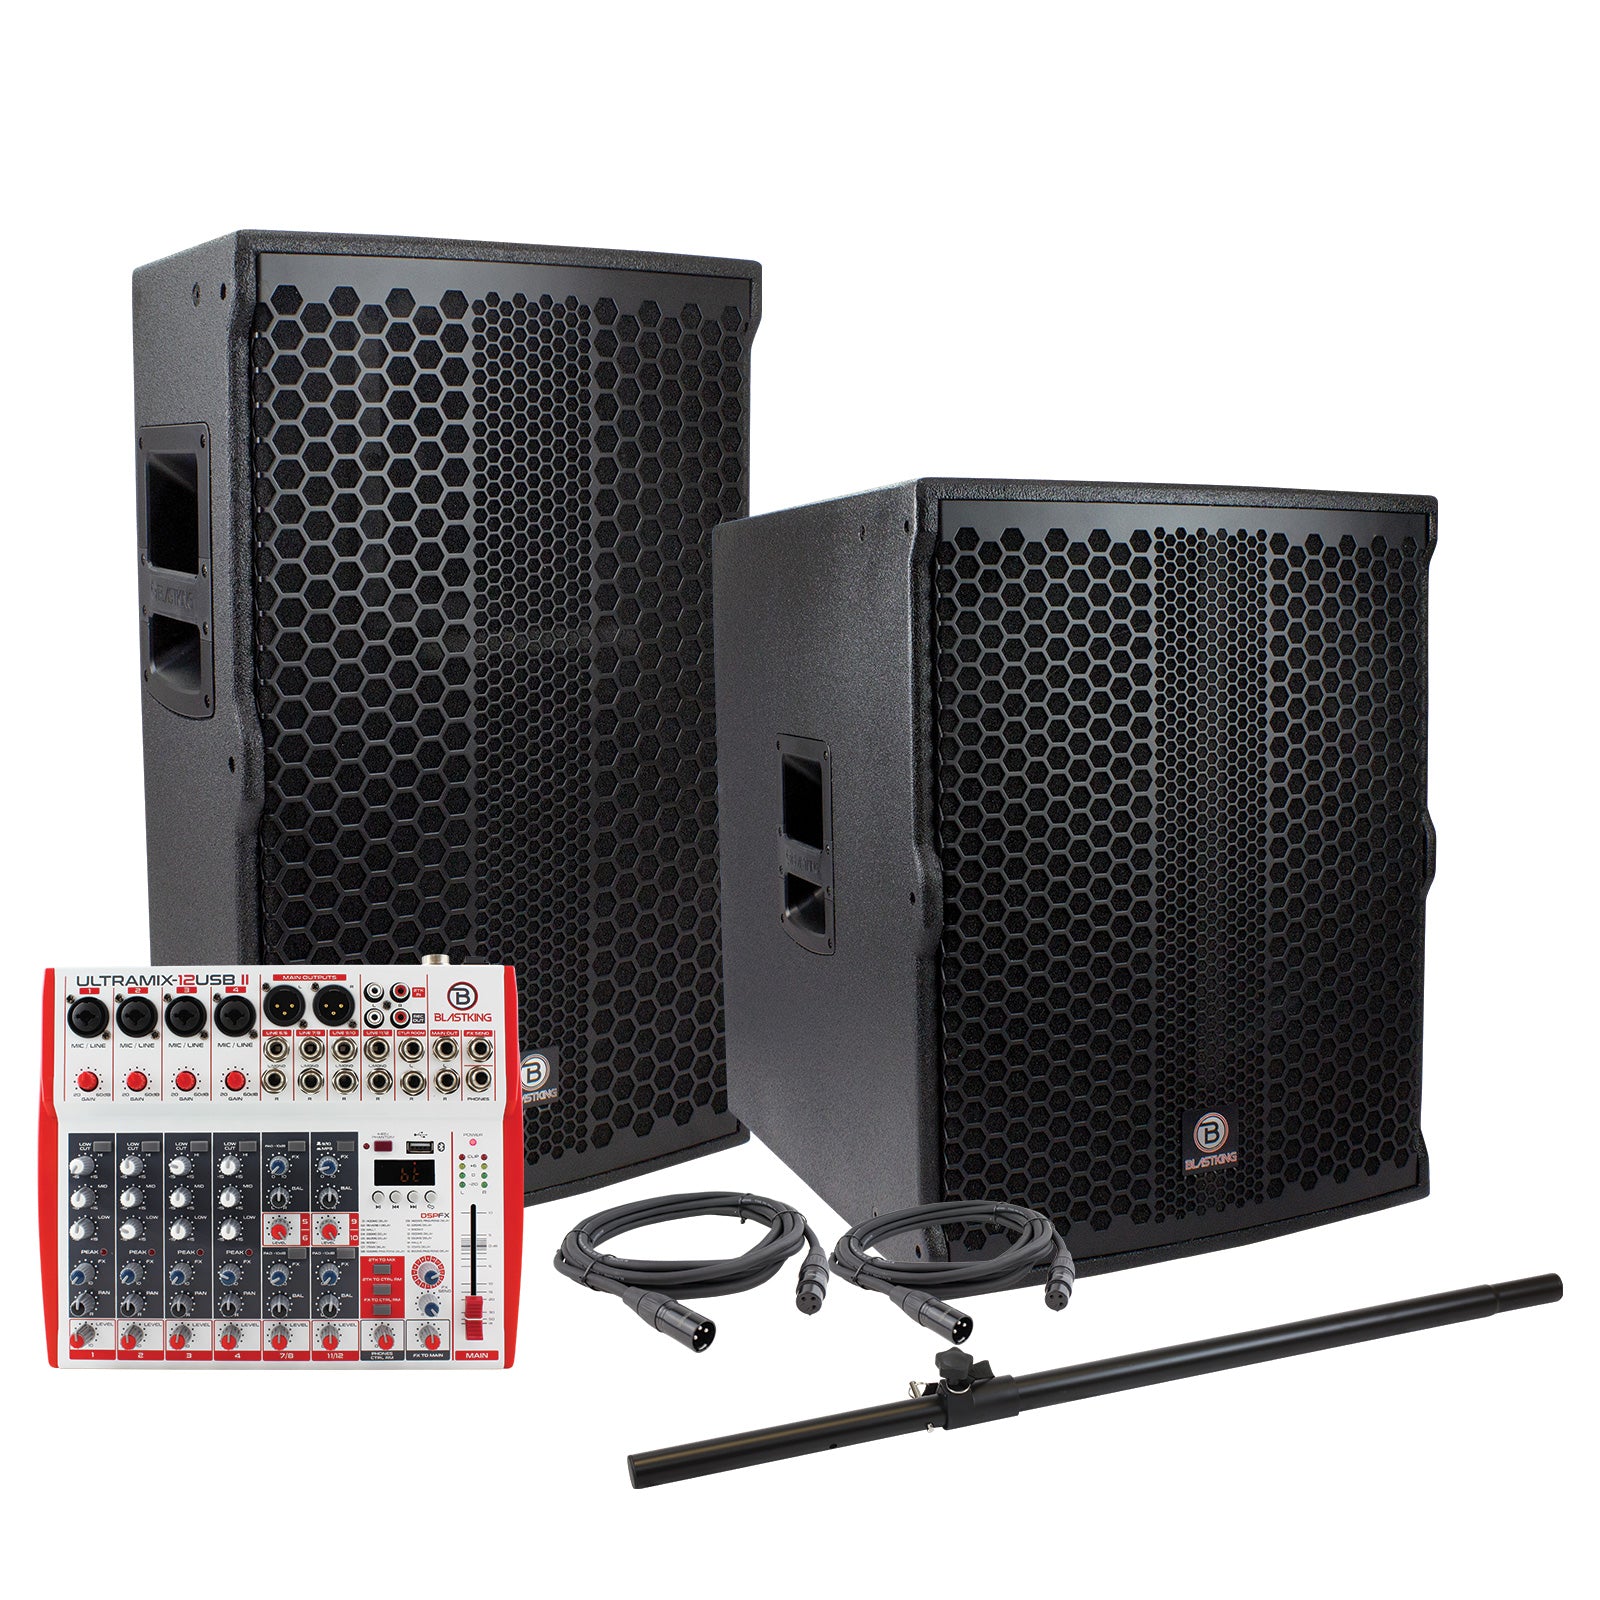 Blastking NOVO15A-PK2 15” NOVO-15A Speaker 1200 Watts + 18” Active Subwoofer 1500 Watts + 12 Channel Analog Mixing Console + Stands + Cables